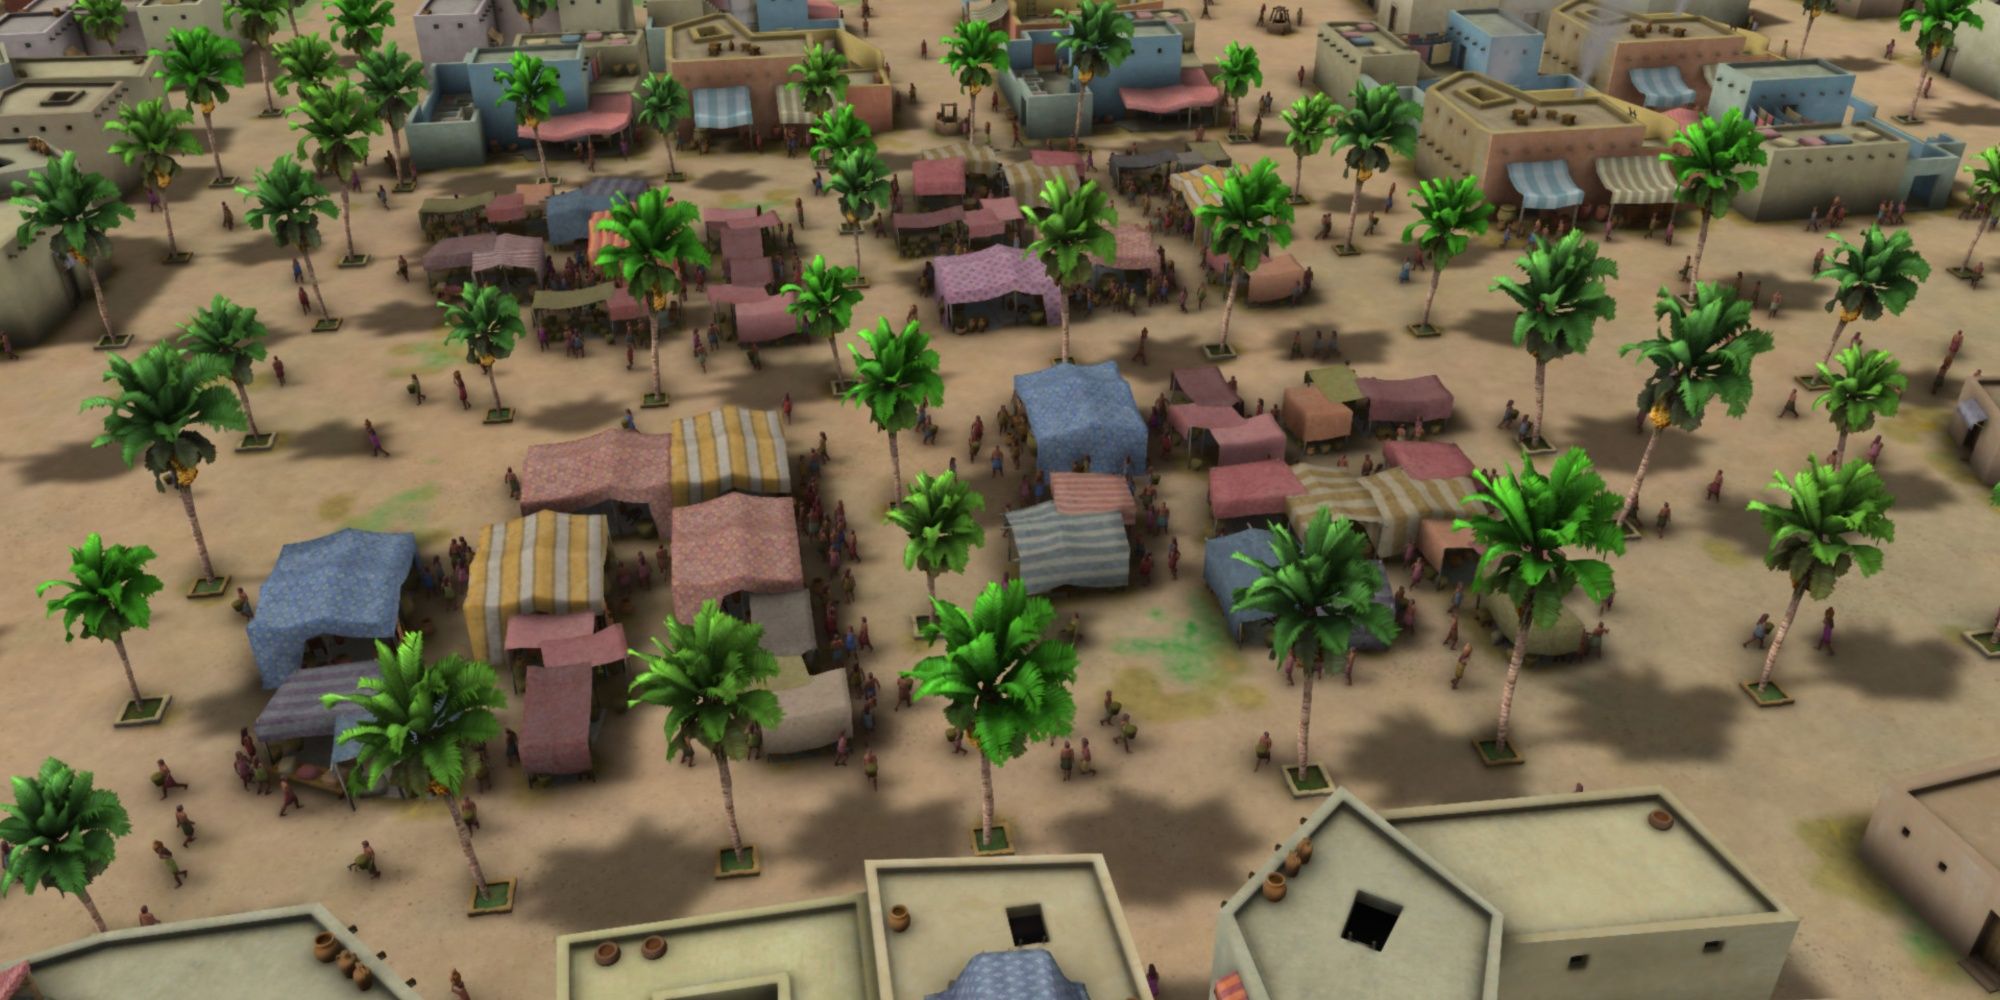 Sumerians - a view of a developing city